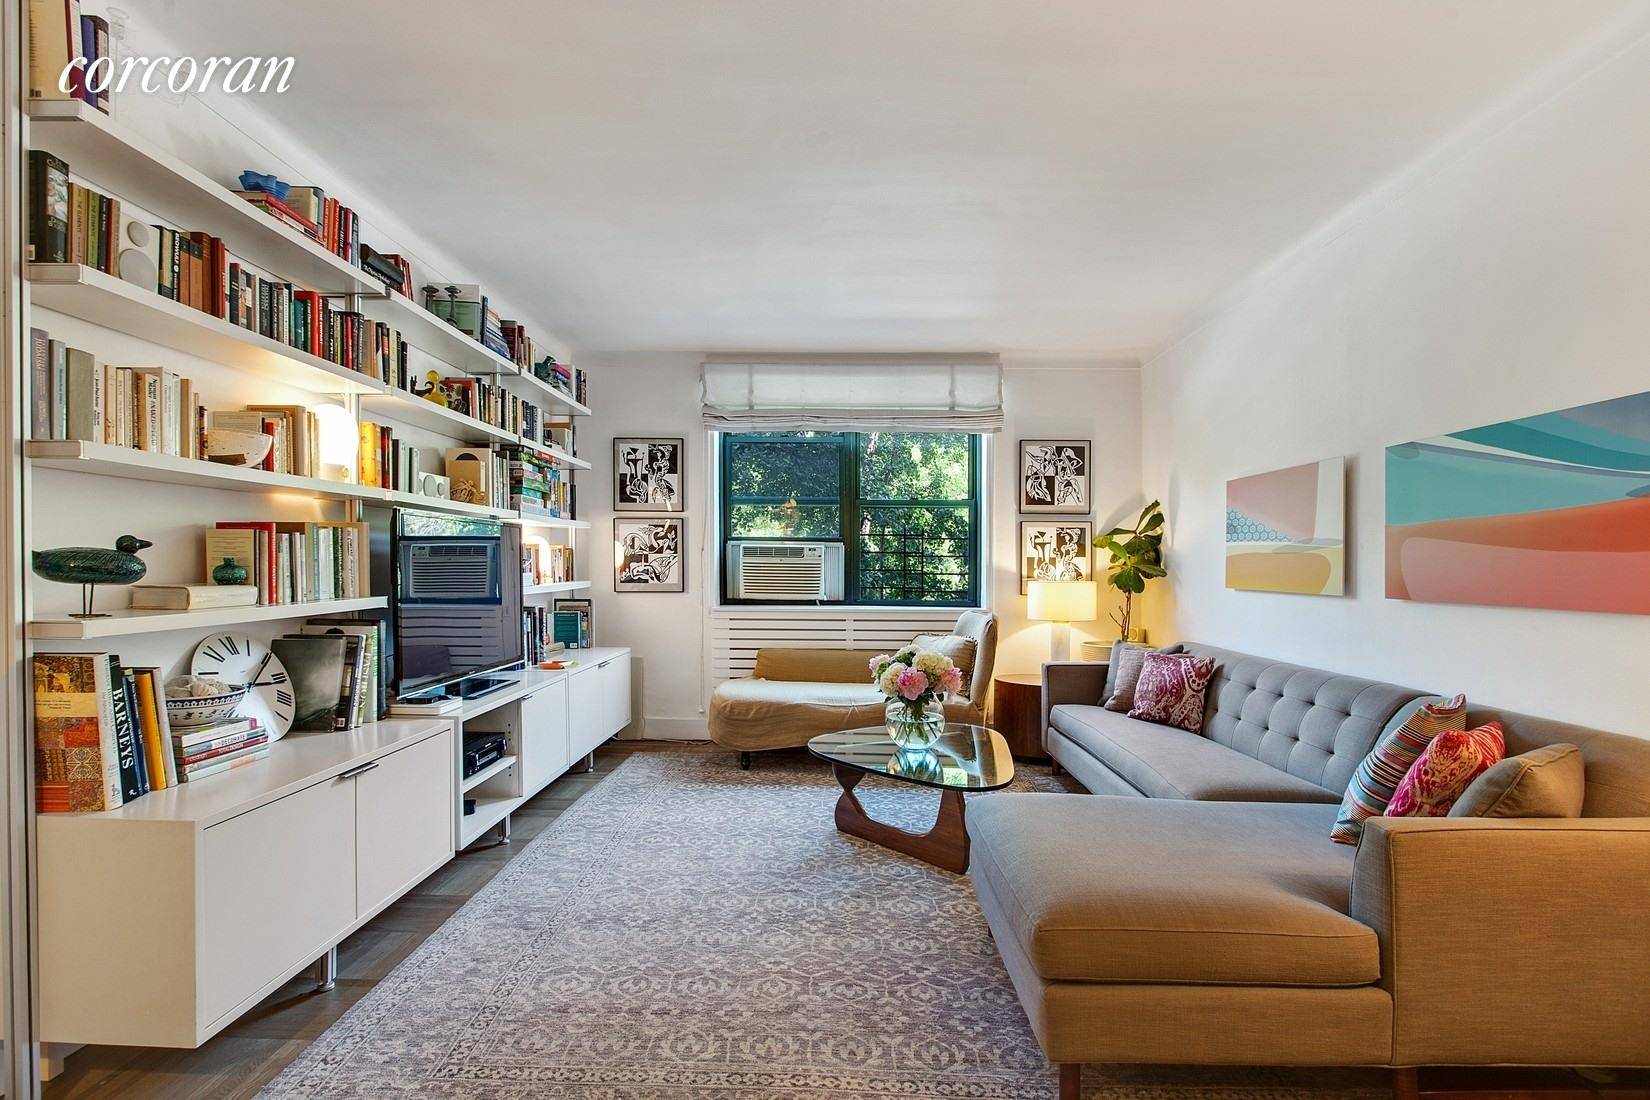 Stylish details abound in this bright and airy two bedroom on Prospect Park.